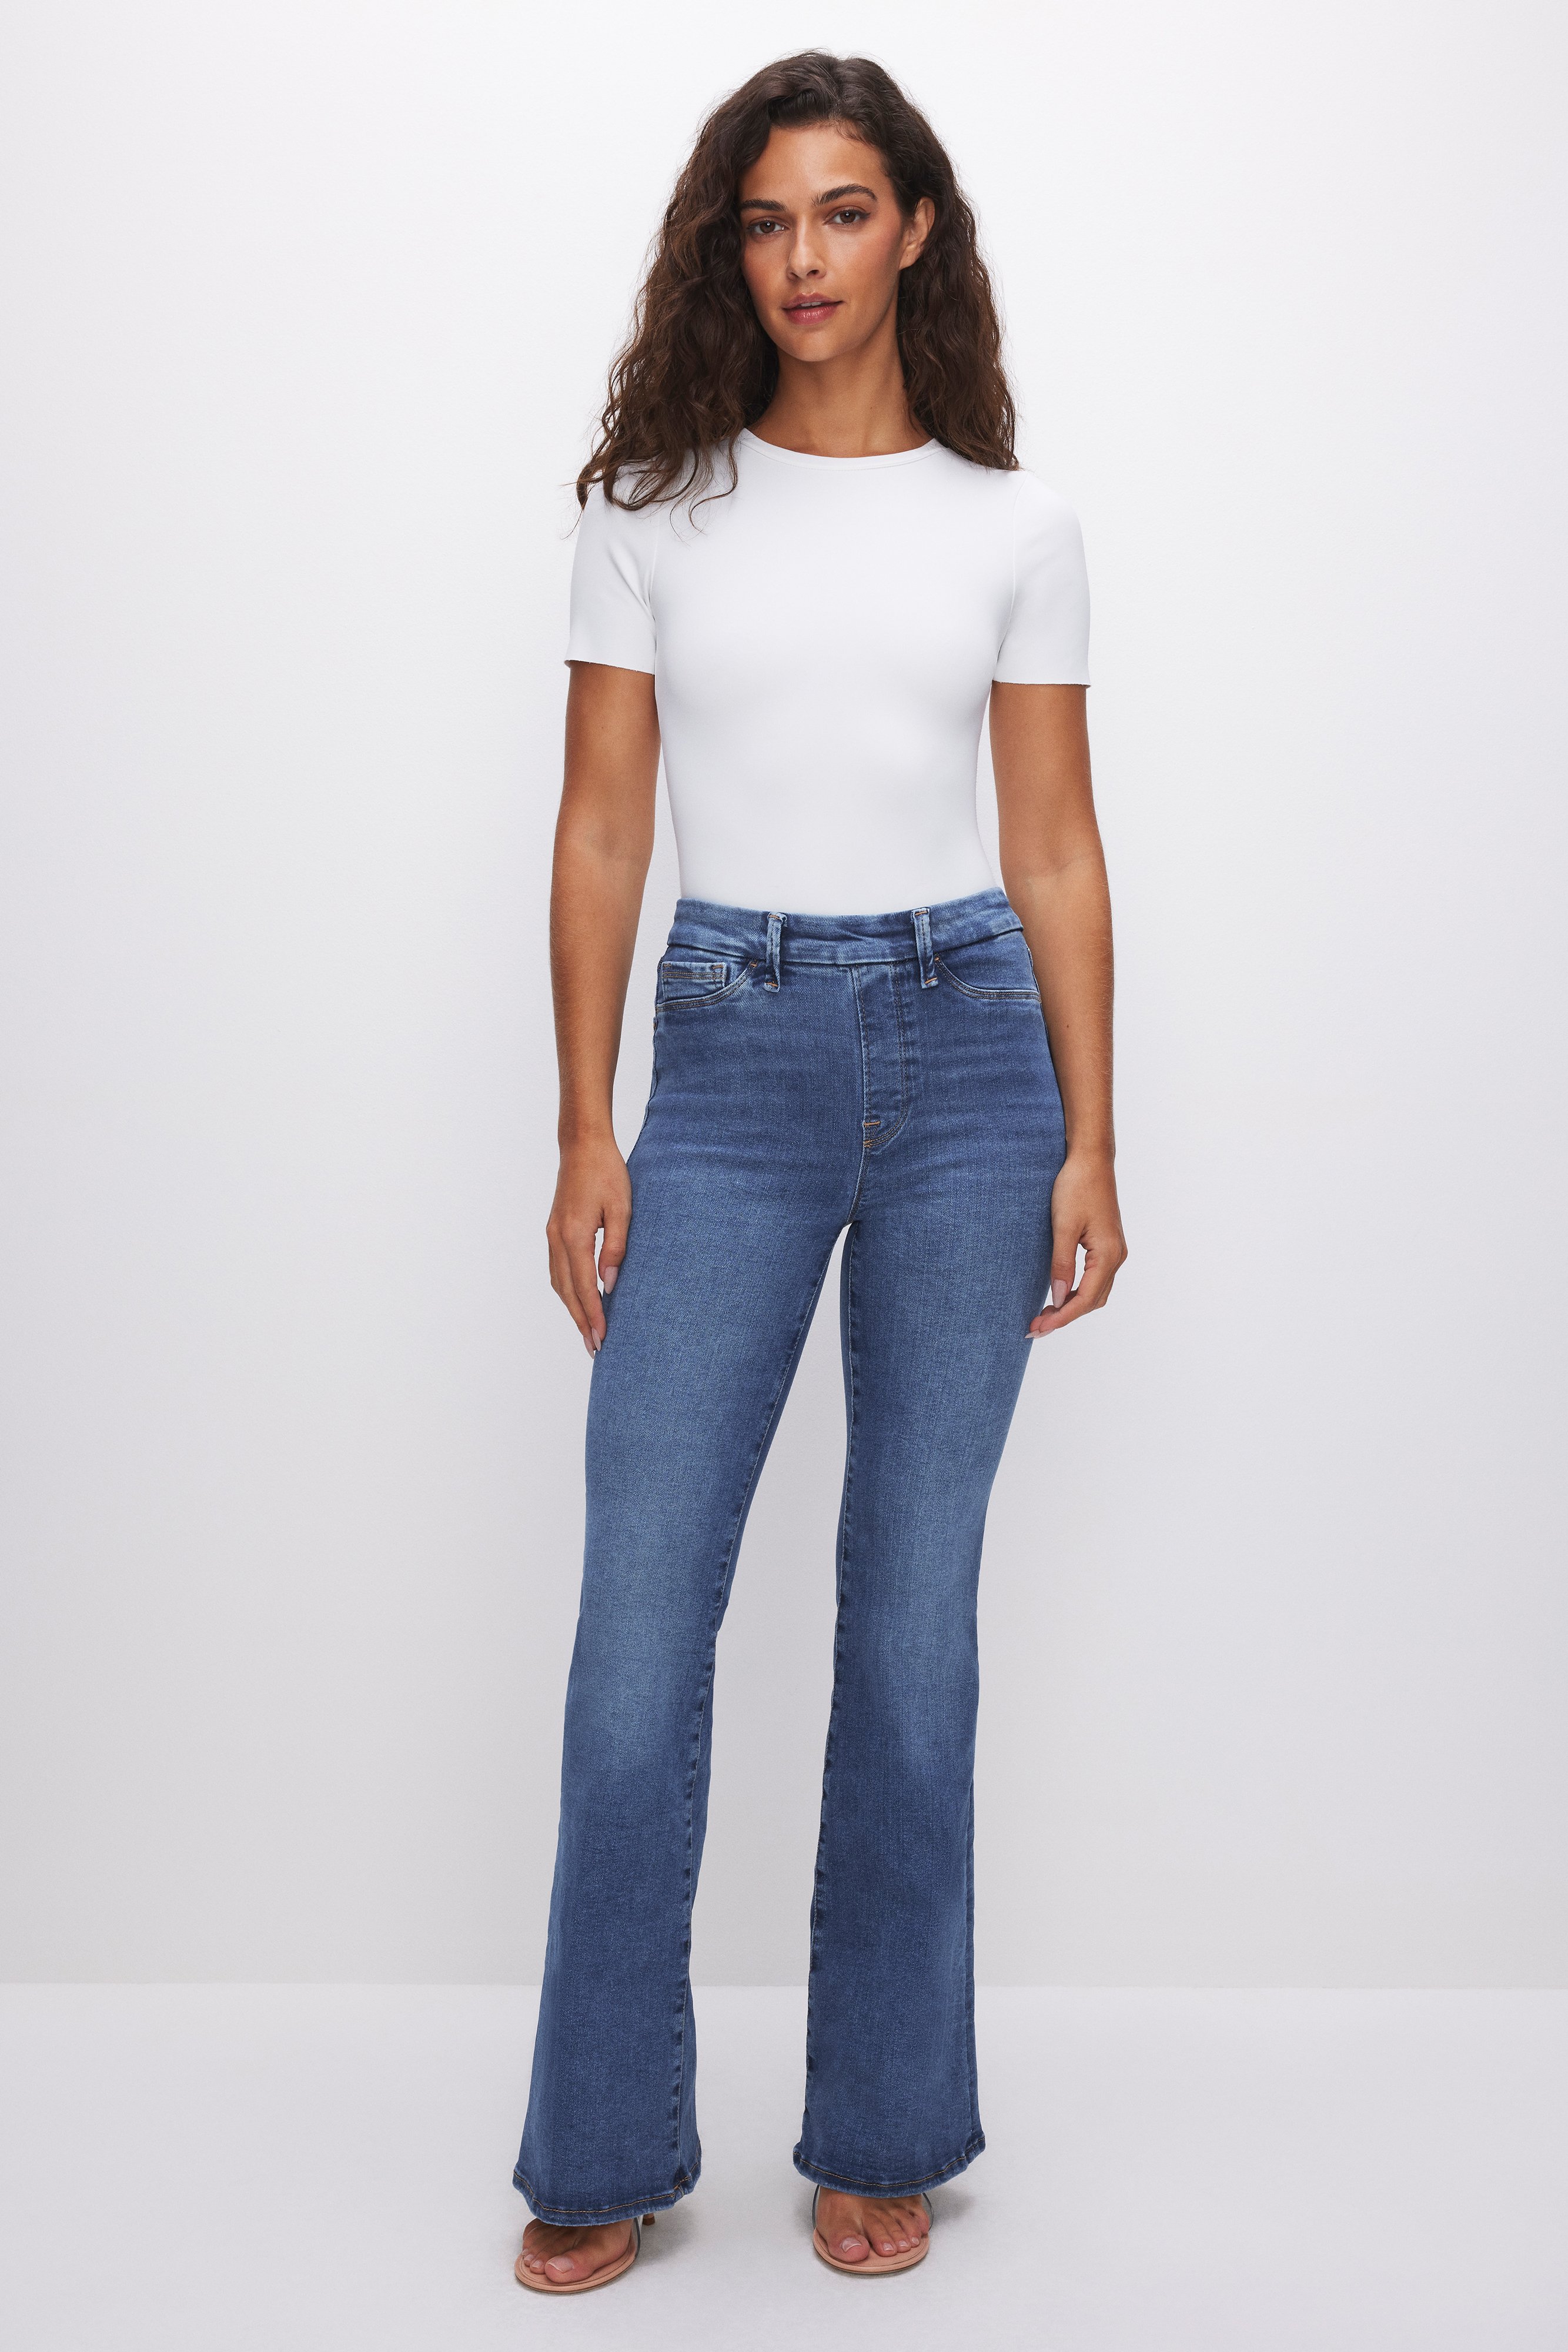 Styled with POWER STRETCH PULL-ON FLARE JEANS | INDIGO490